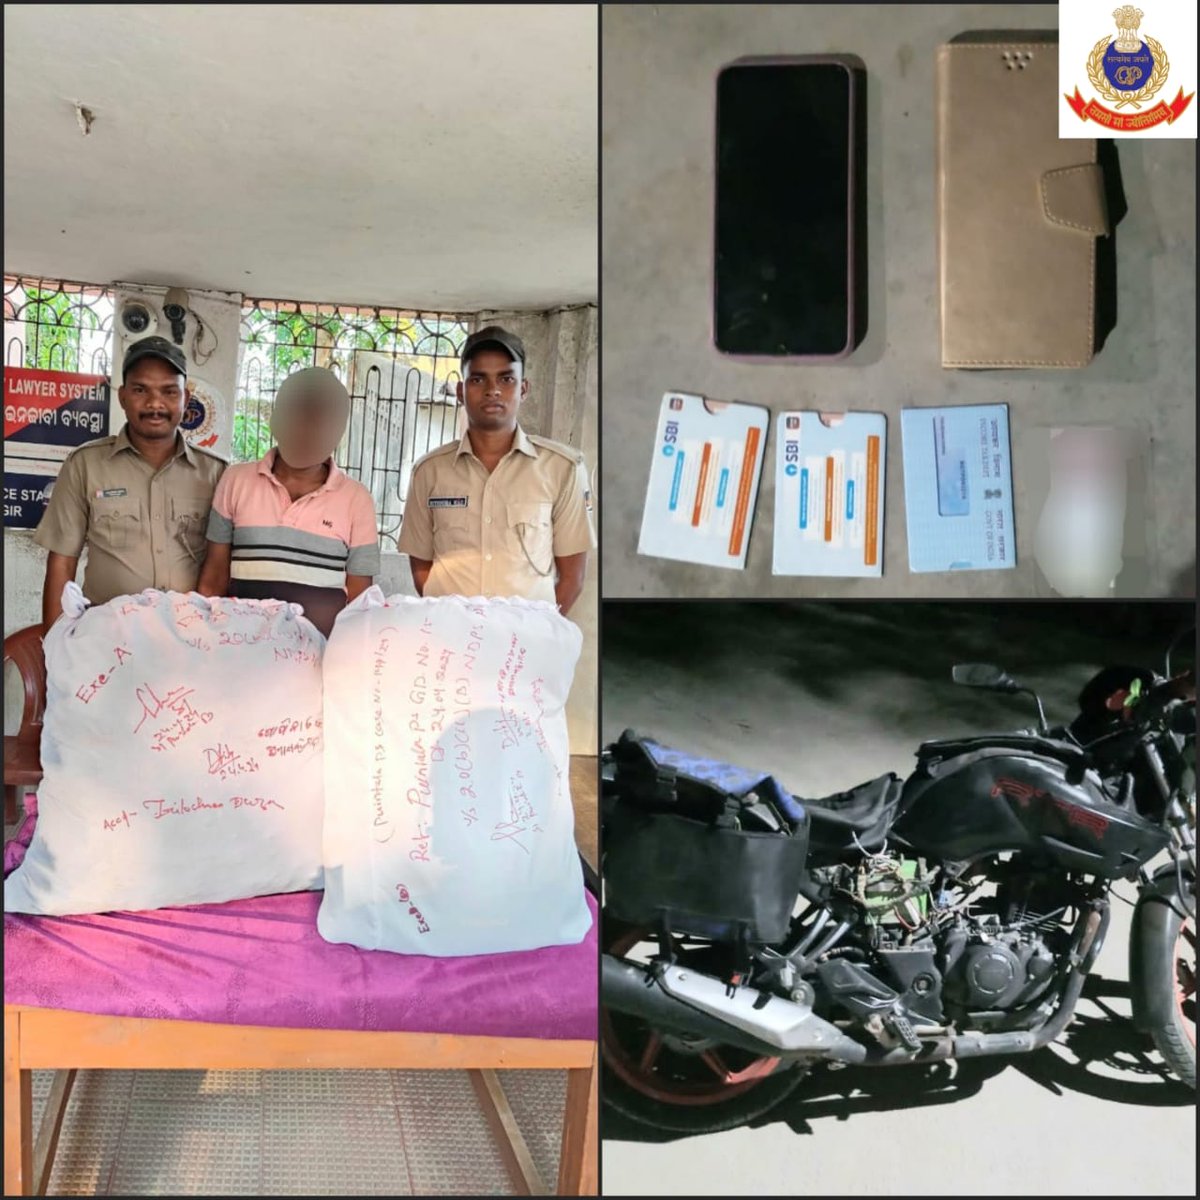 NDPS Case Detected!! Puintala PS team led by IIC S Dharua apprehended at interdist BCP one Ganja smuggler of Kalahandi transporting 11.1 Kg contraband Ganja. Seized 01 M/C, 02 mobile phones & 02 ATM cards from their possession.